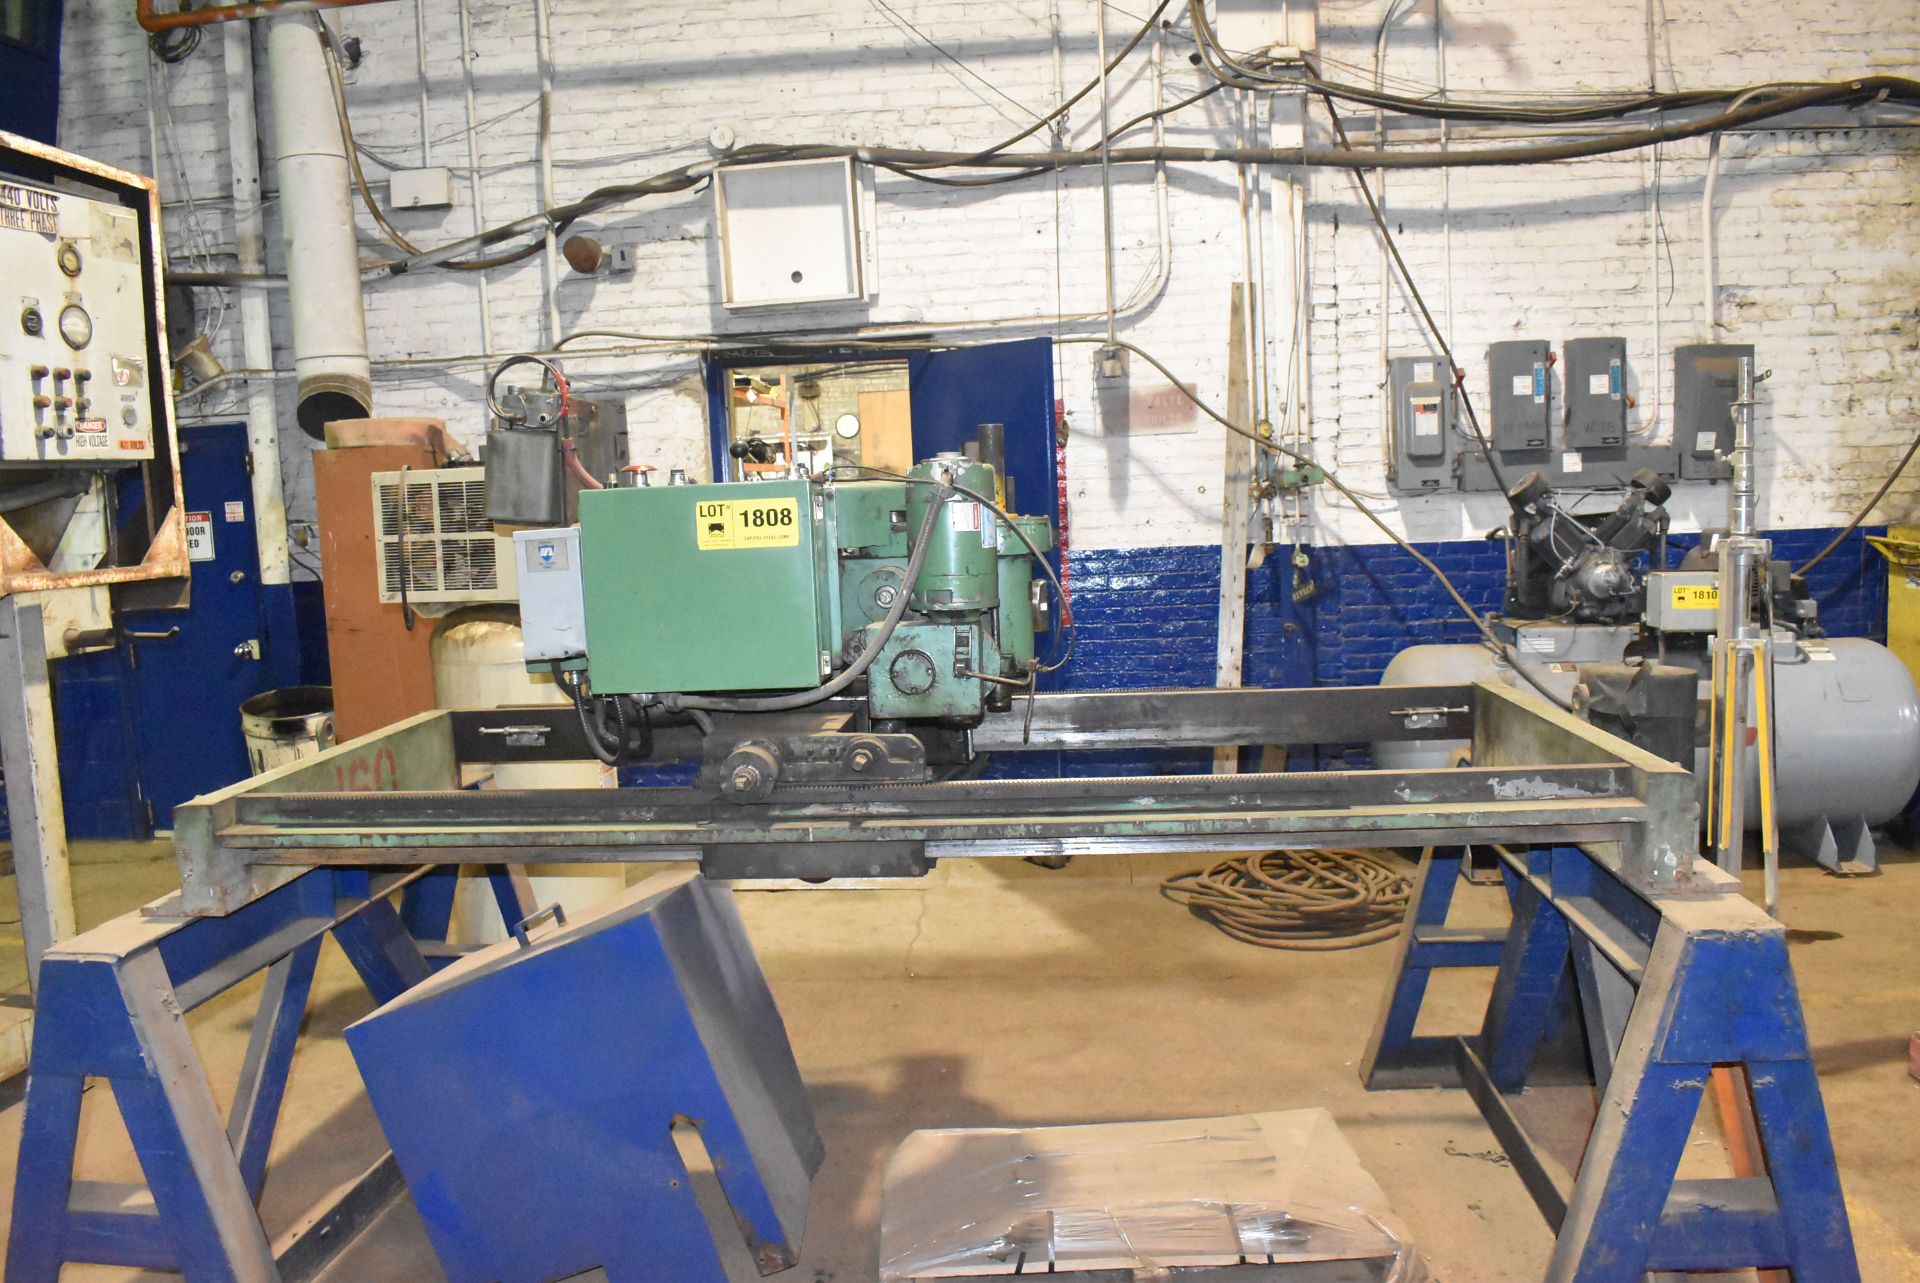 HEARN SDT7BA PORTABLE XY DRILL WITH GANTRY-TYPE TABLE, S/N: 1106 (CI) [RIGGING FEES FOR LOT #